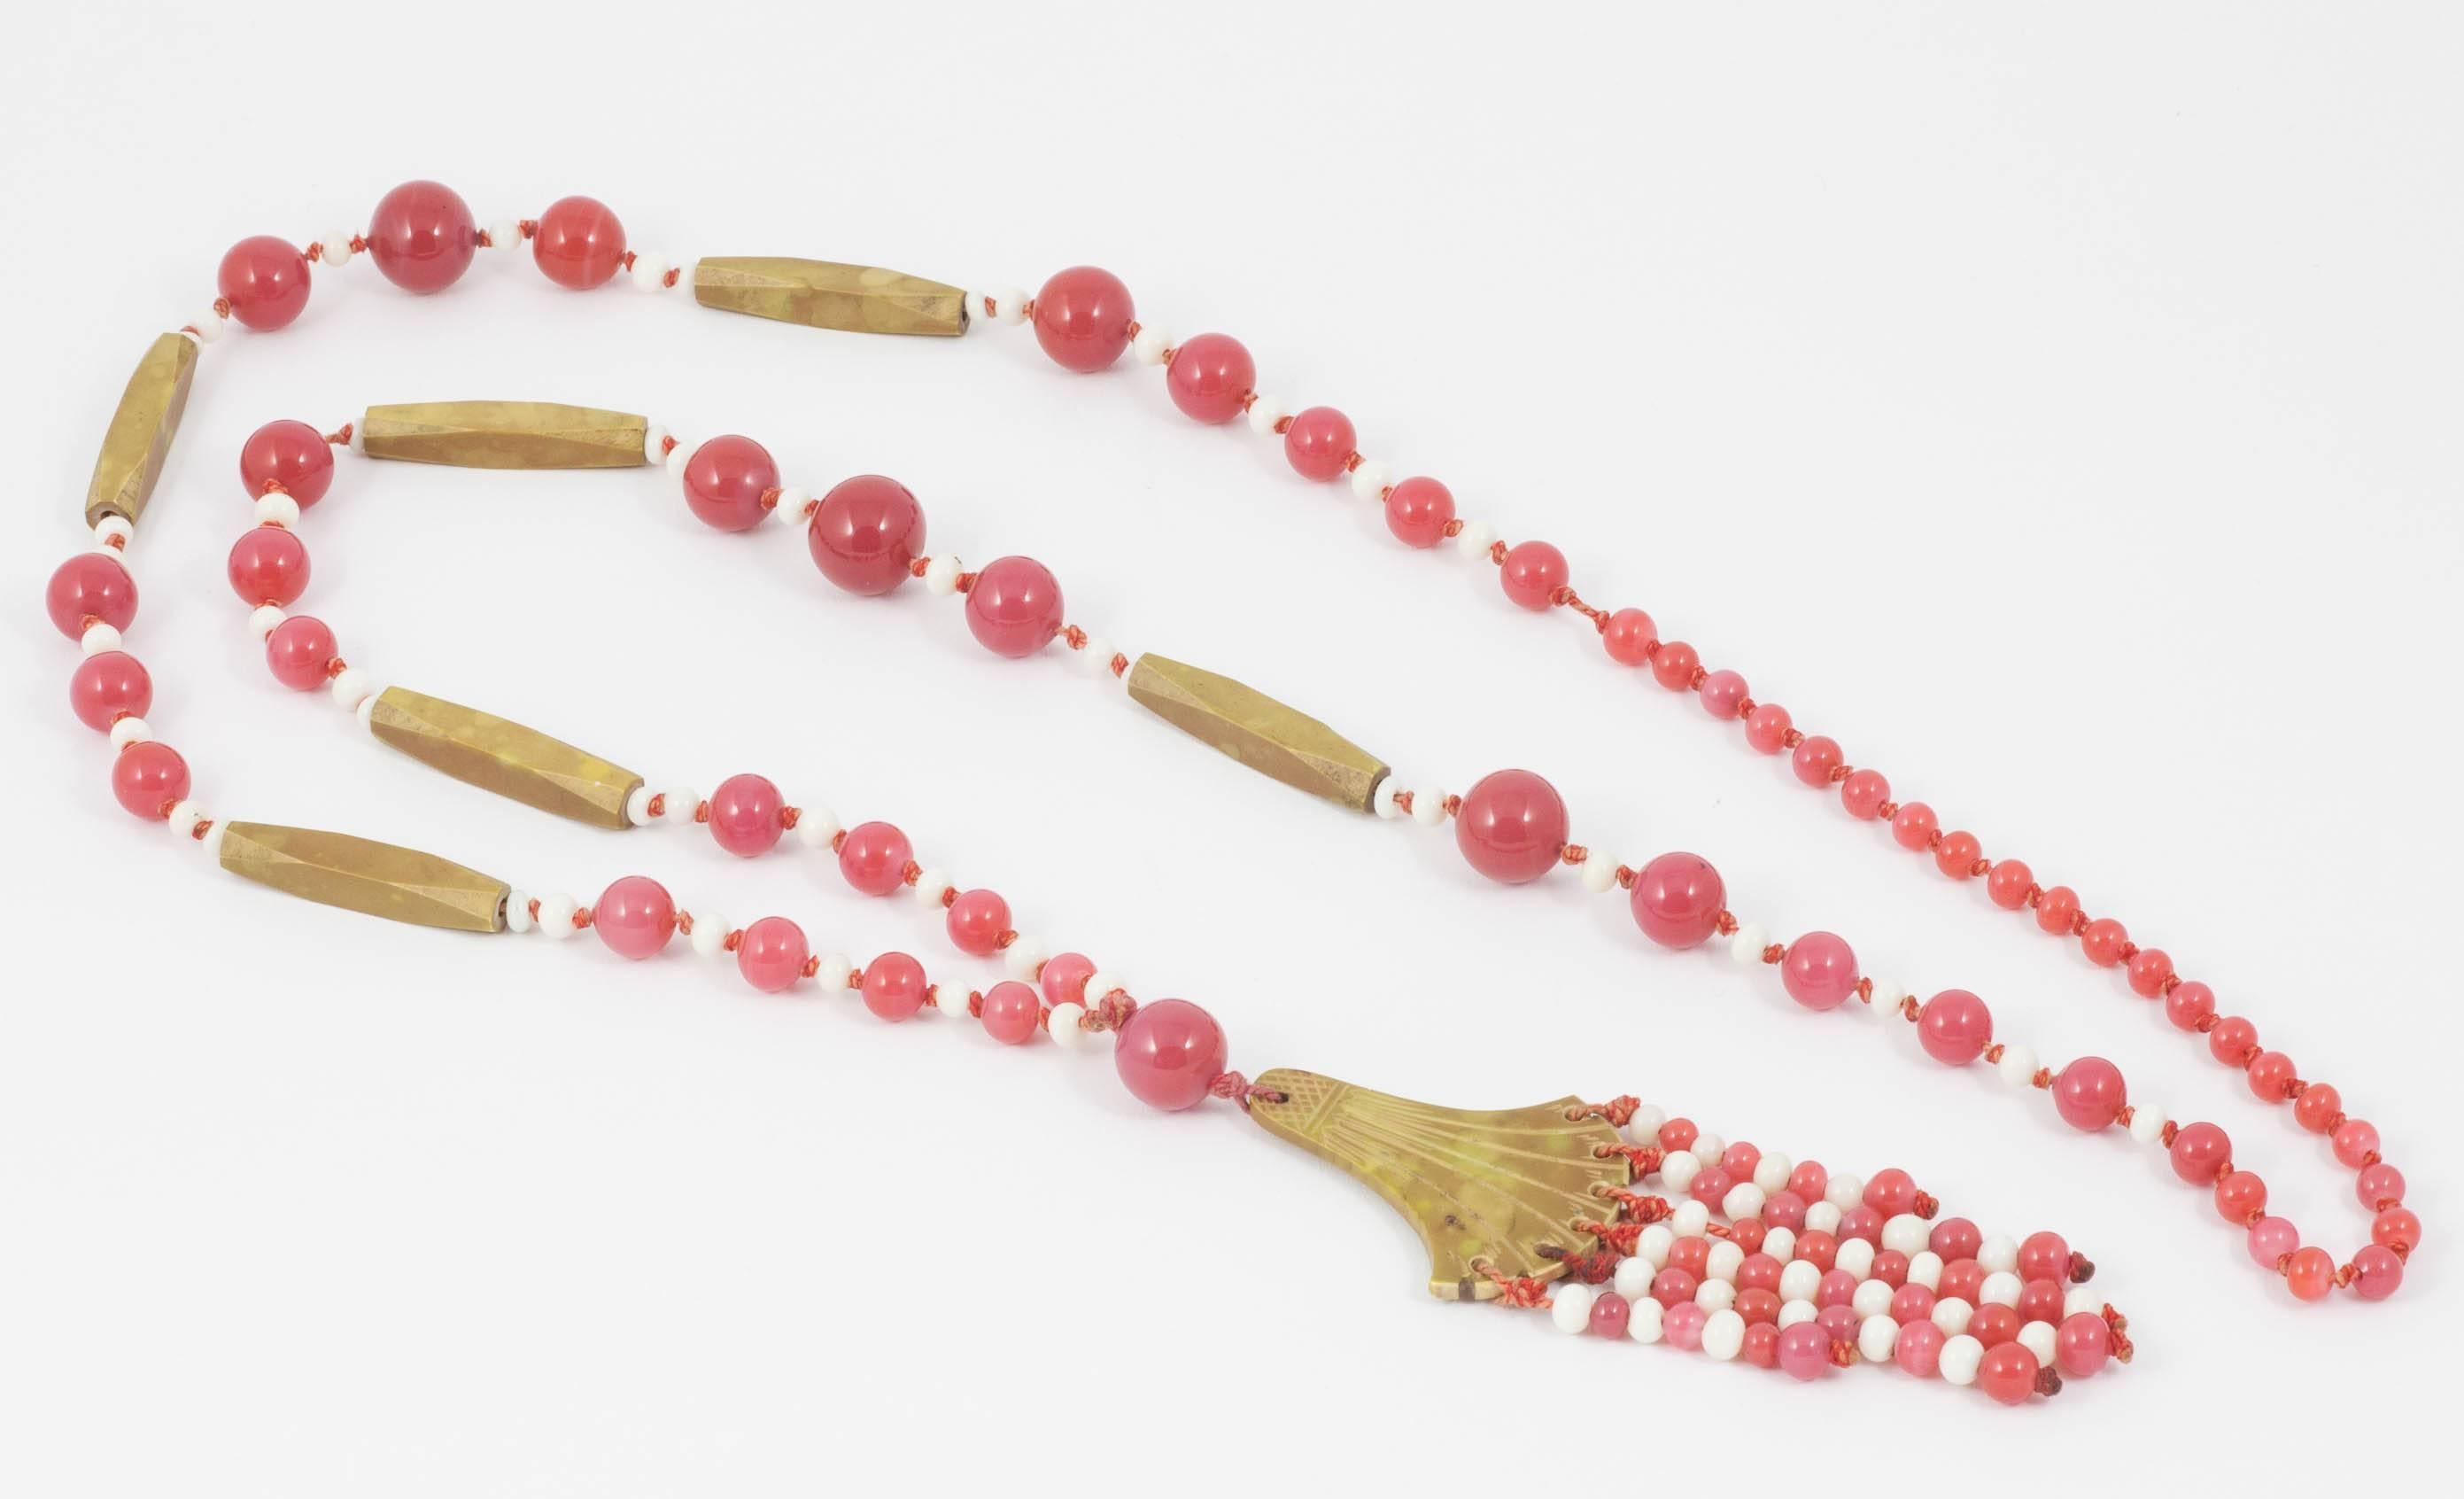 This long dramatic flapper necklace is especially appealing because of its unusual colour combination and use of materials.
Galalith was a plastic derived from milk protein that was used by the fashion industry in France from 1900 onwards, as it